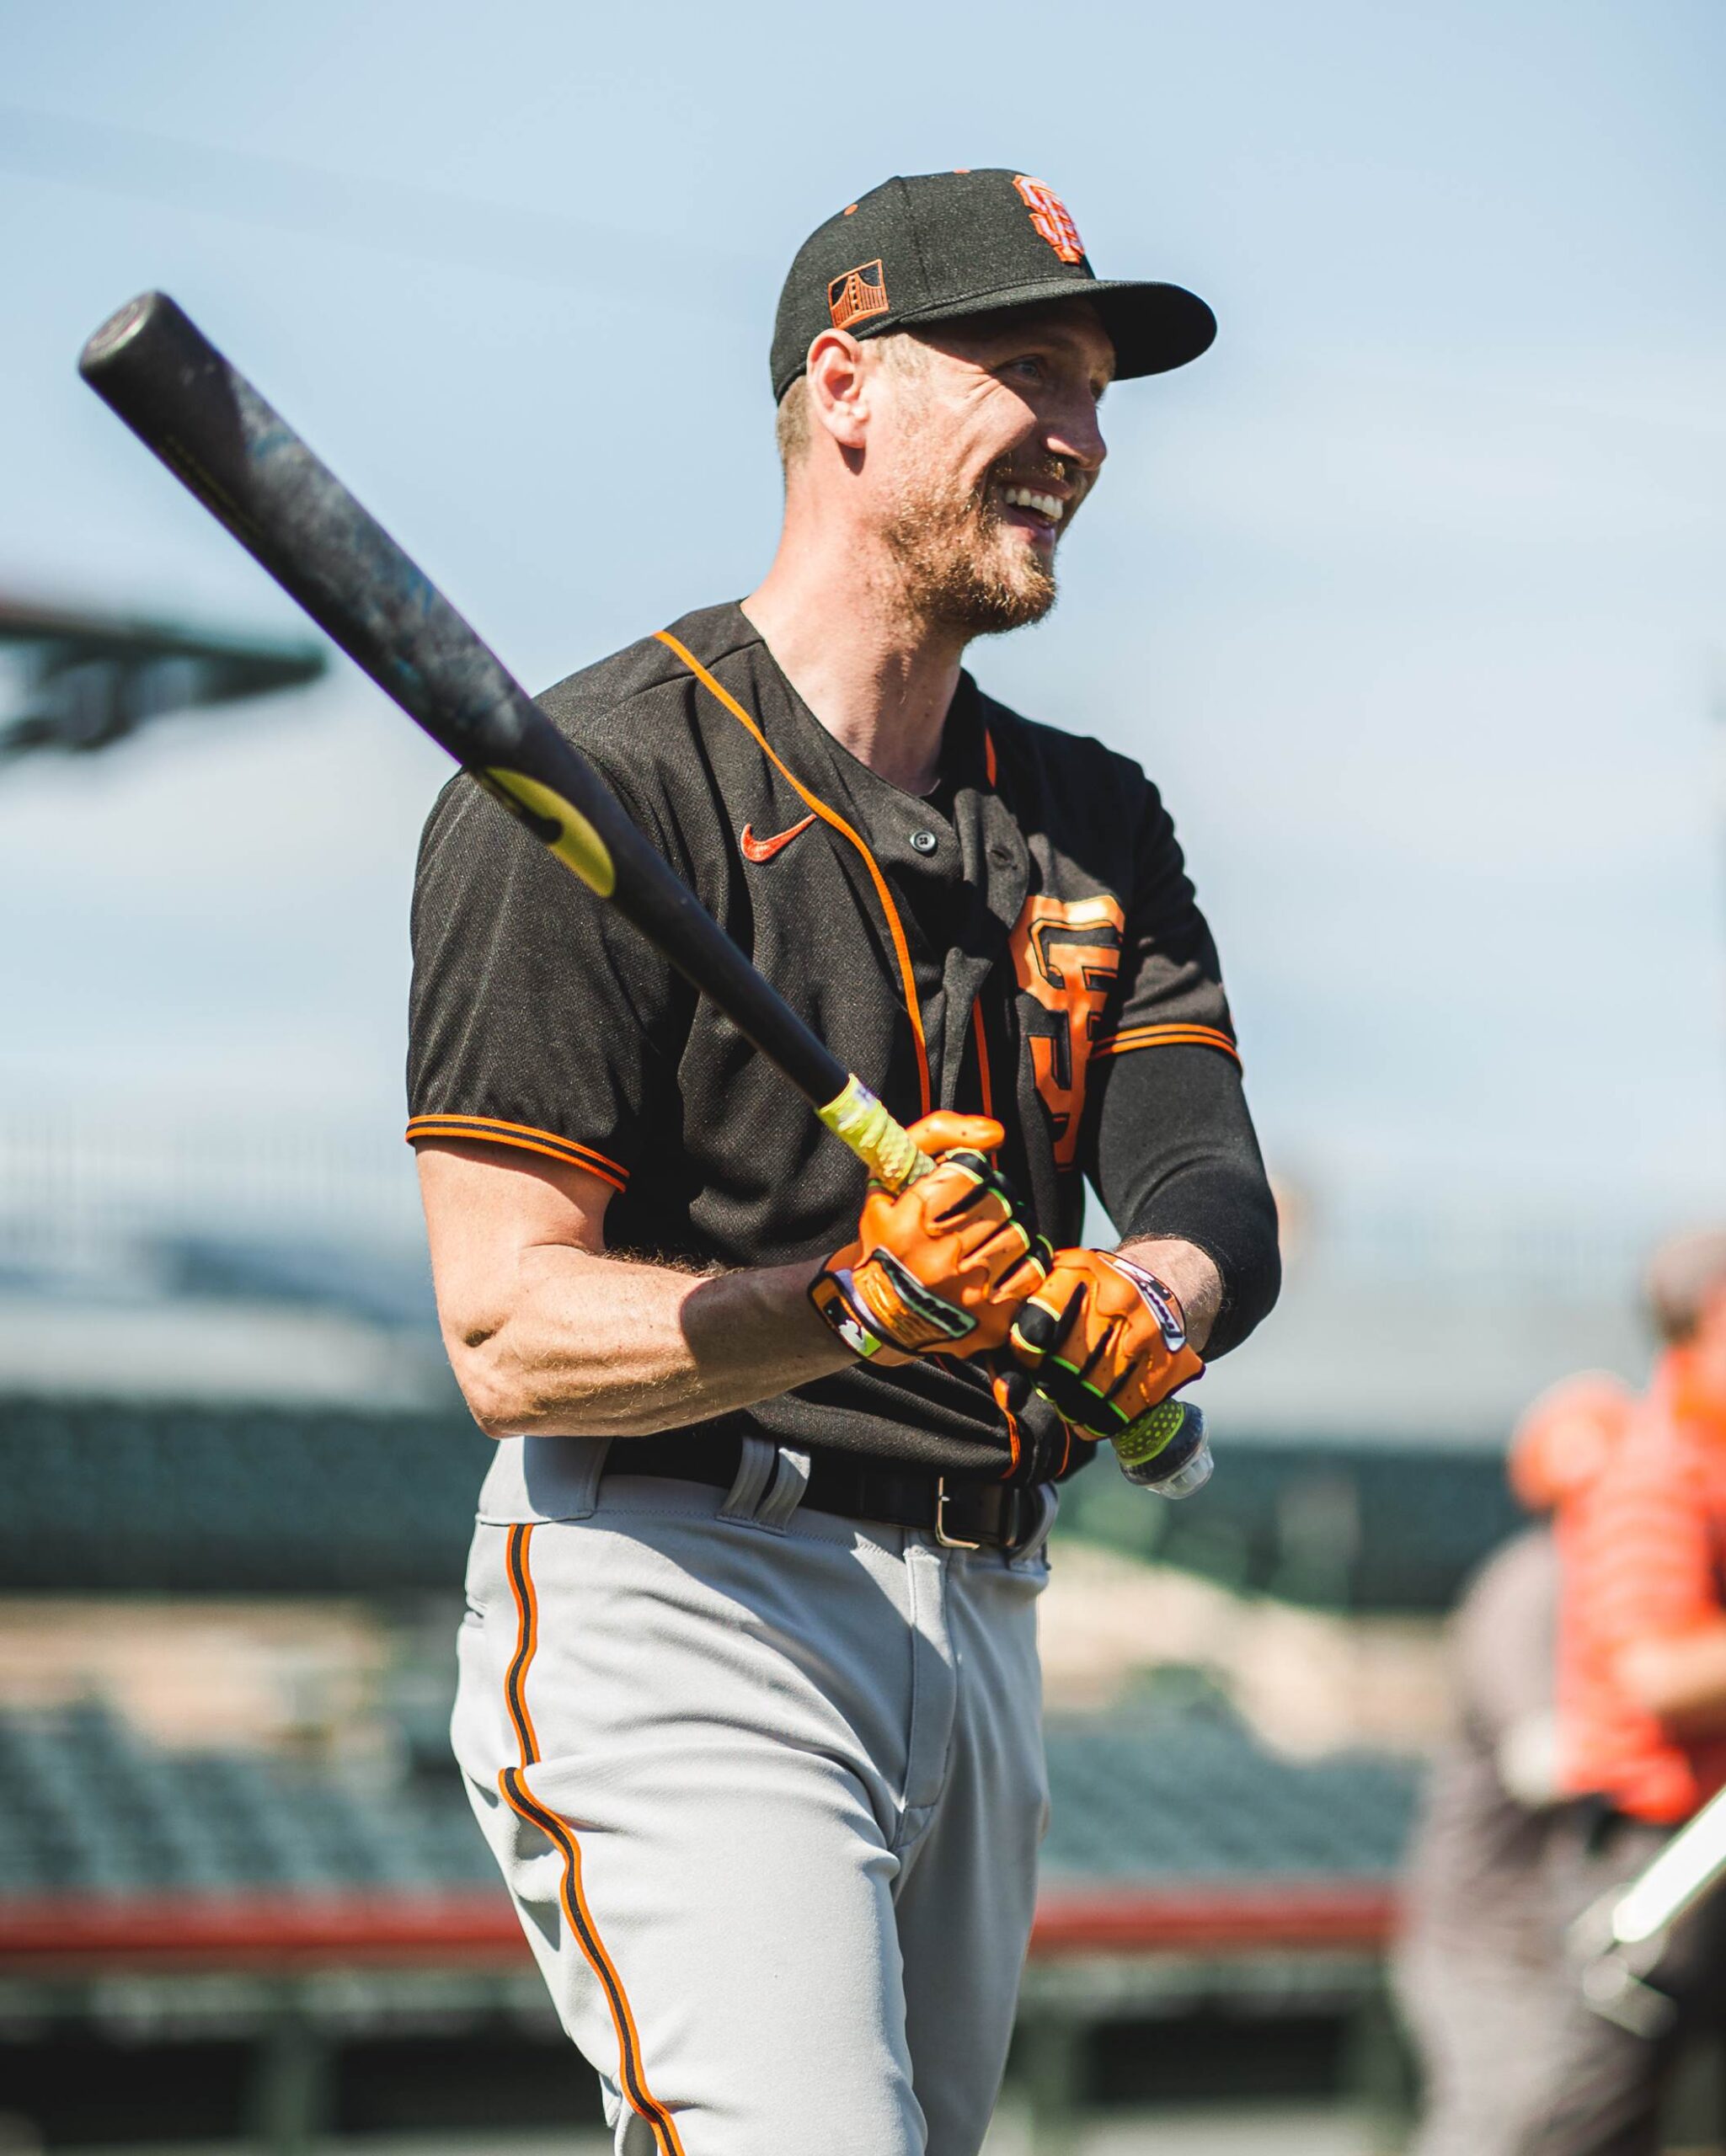 Close-up of a black and orange clad baseball player with a bat.